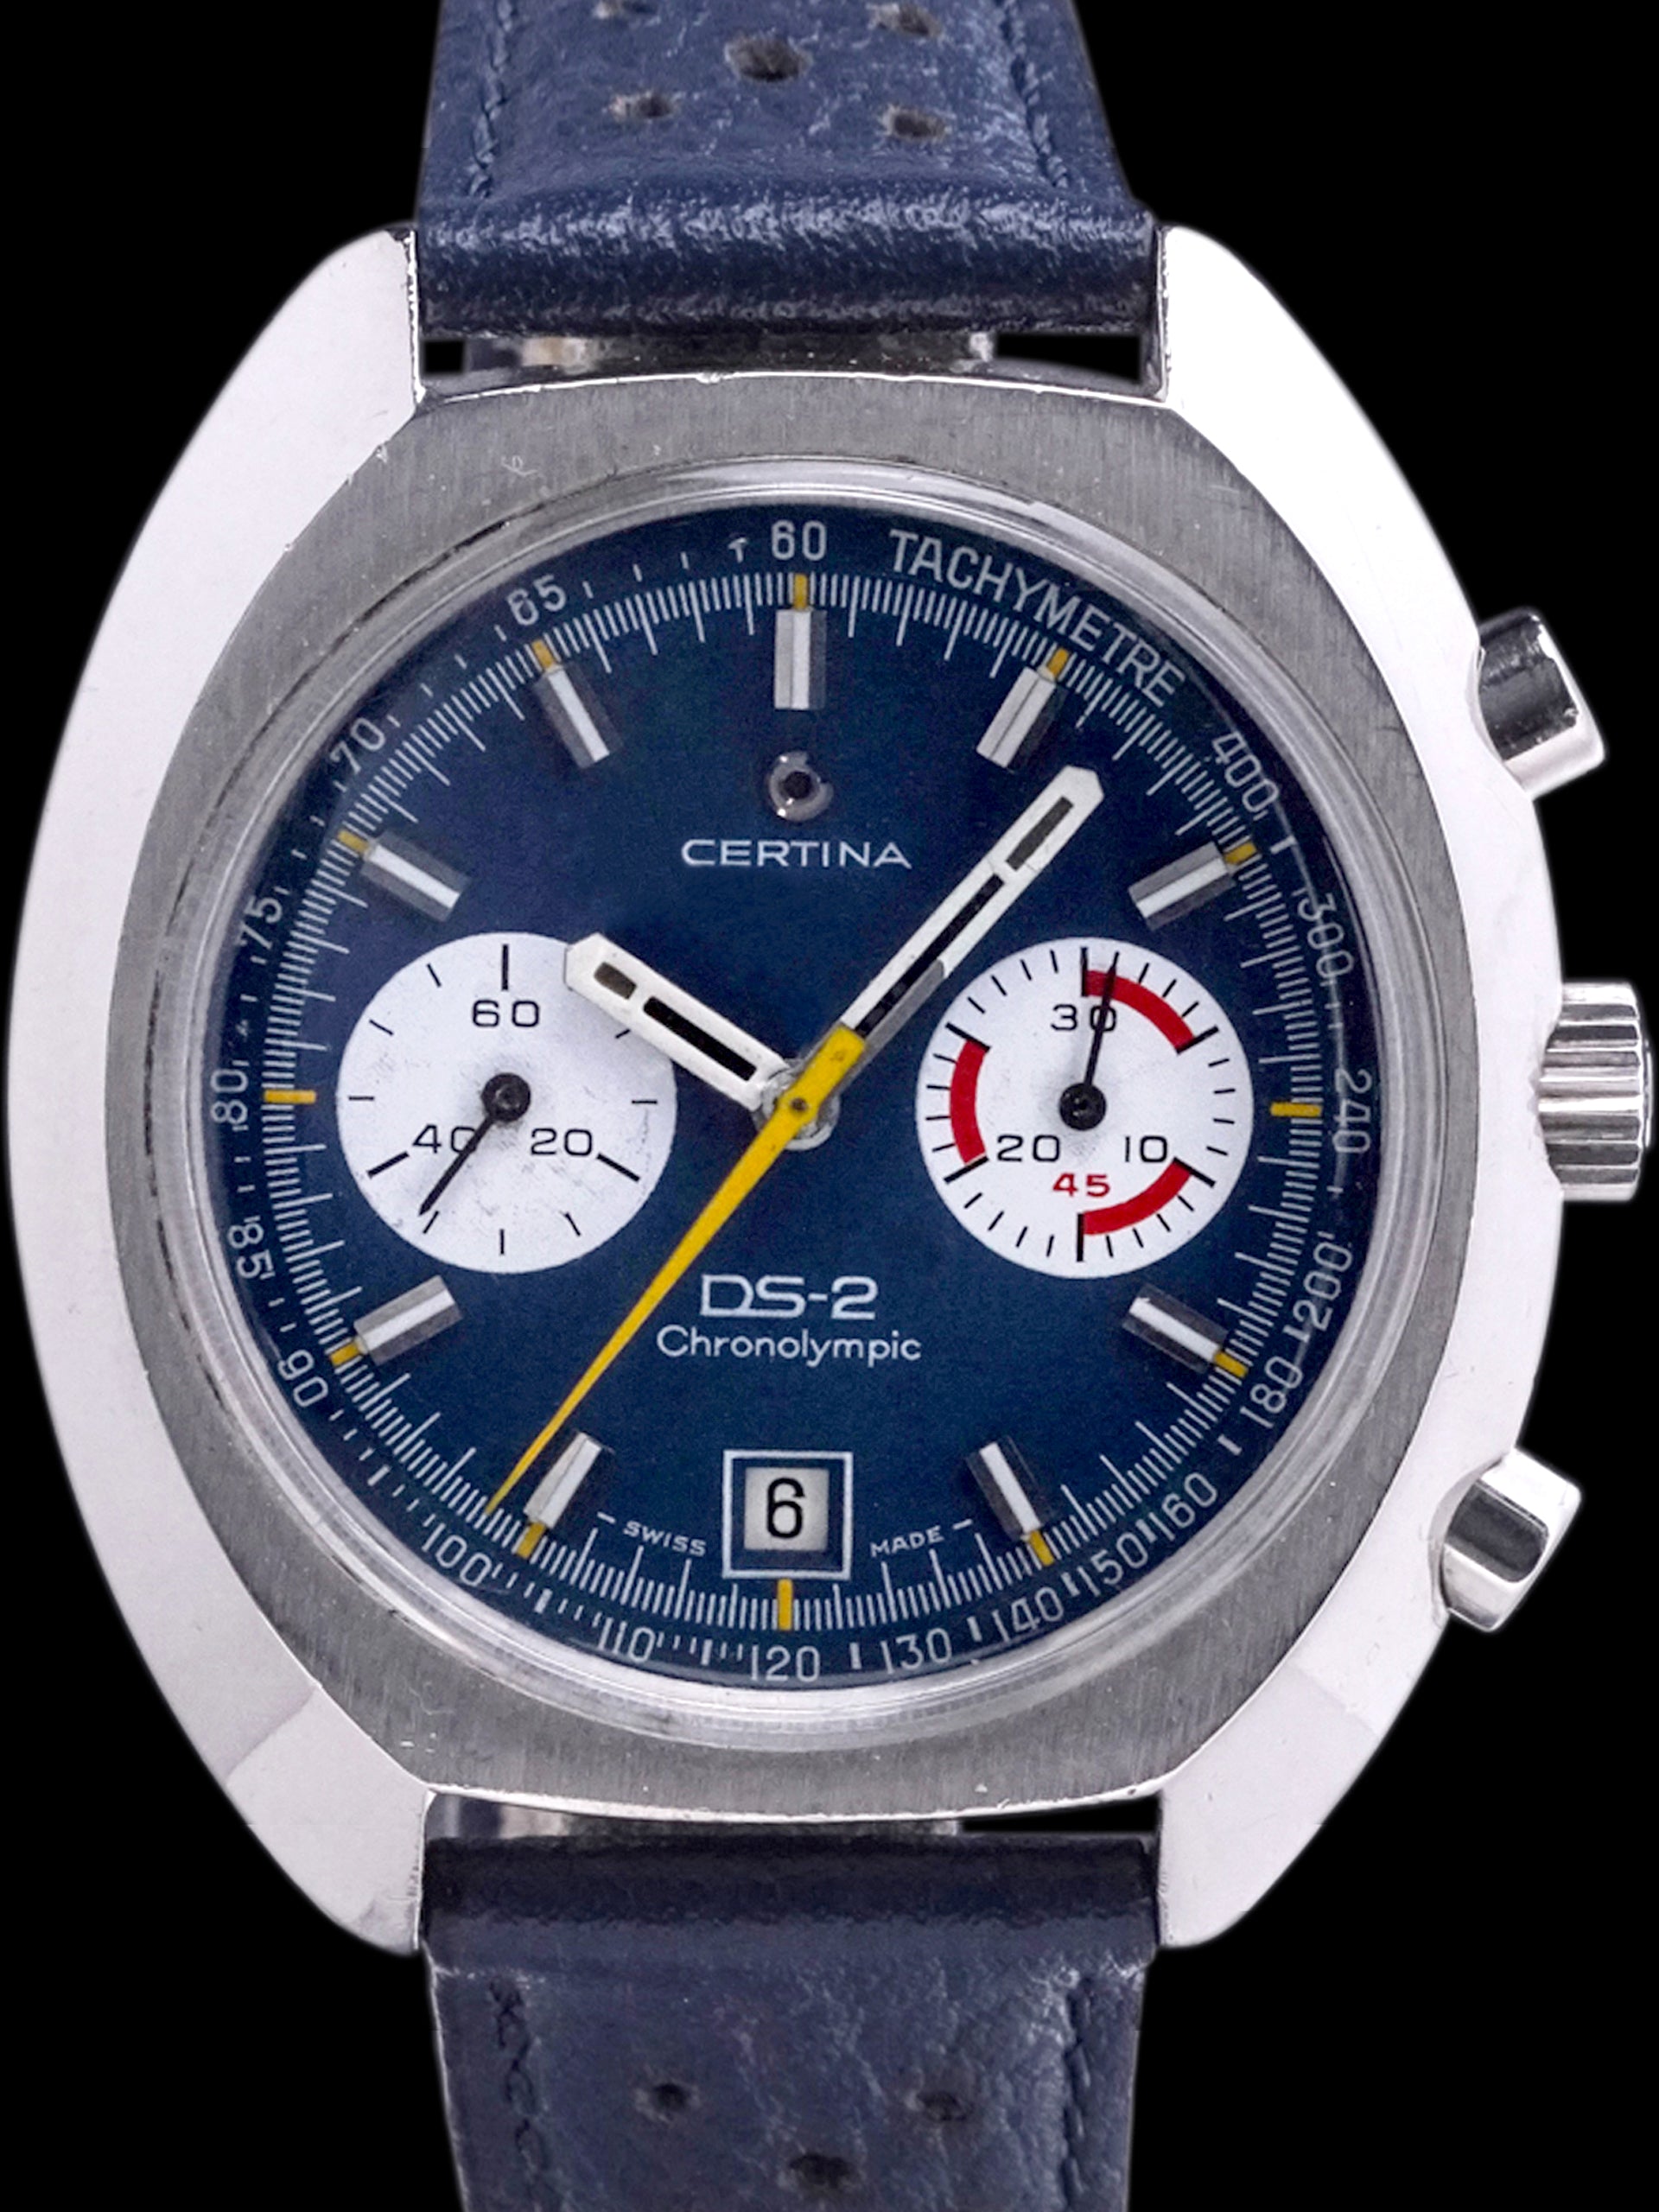 1970s Certina DS-2 Chronolympic (Ref. 8601 800) Blue Dial